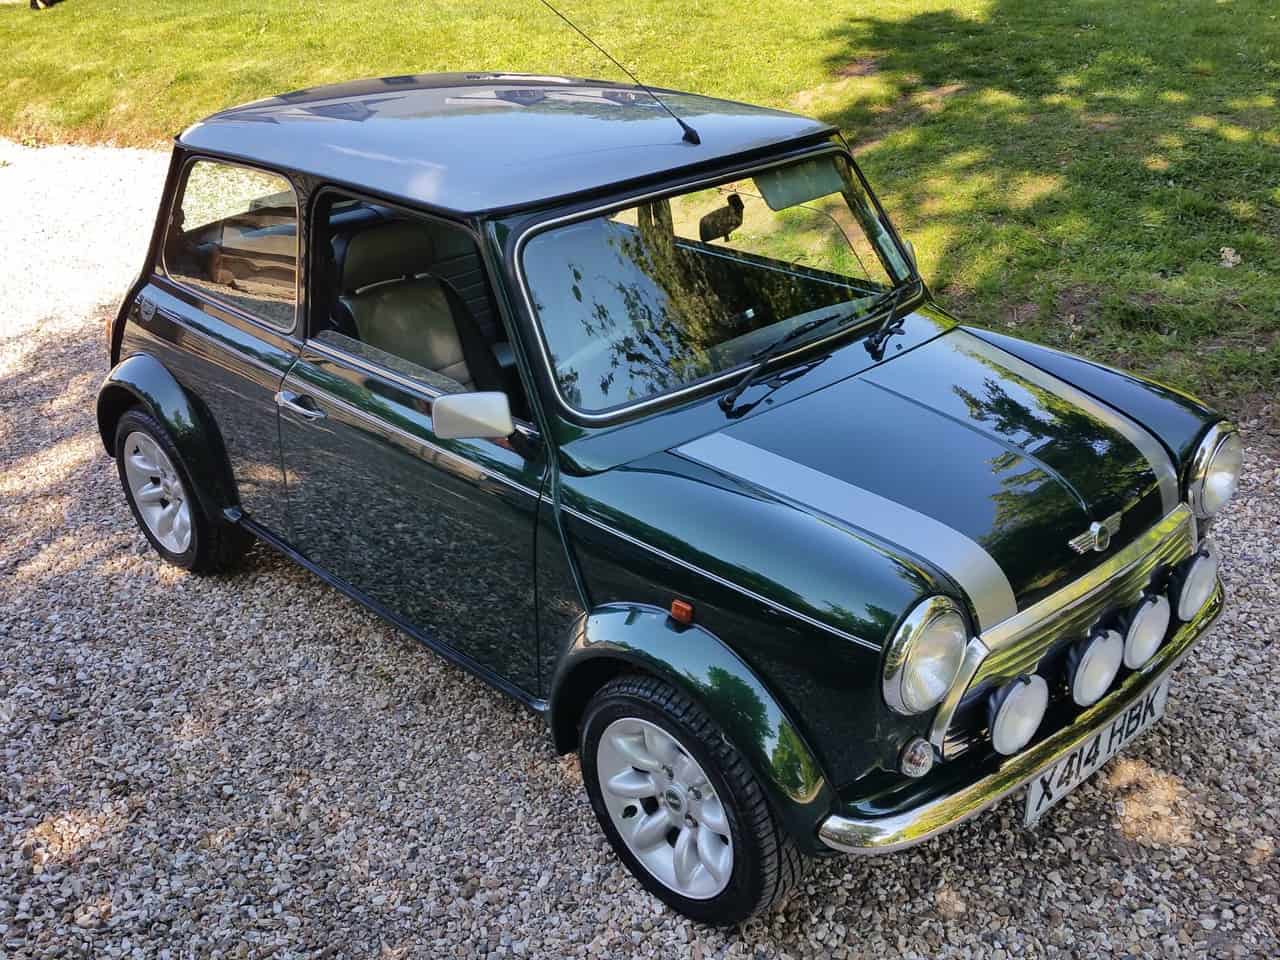 ** NOW SOLD  ** 2000 Mini Cooper Sport On 7150 Miles From New